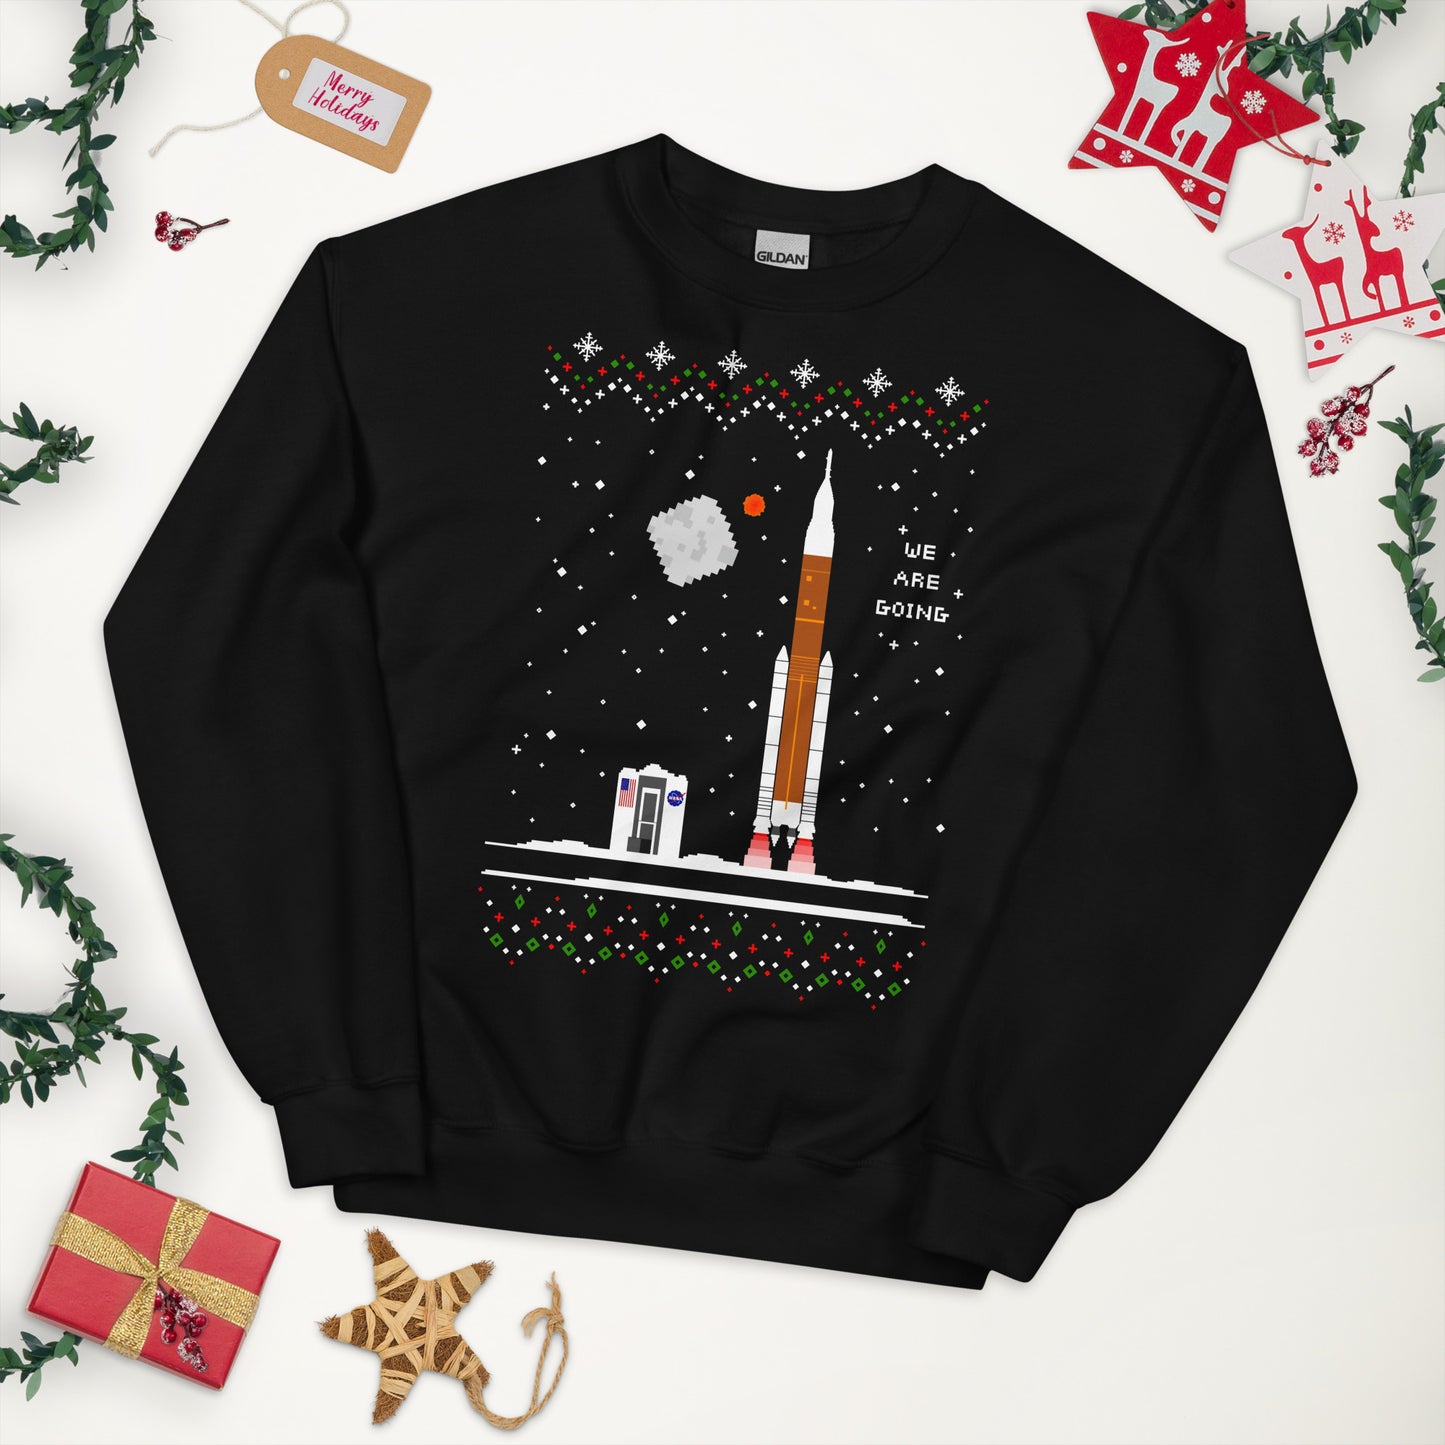 We Are Going Ugly Space Sweatshirt (Limited Edition)